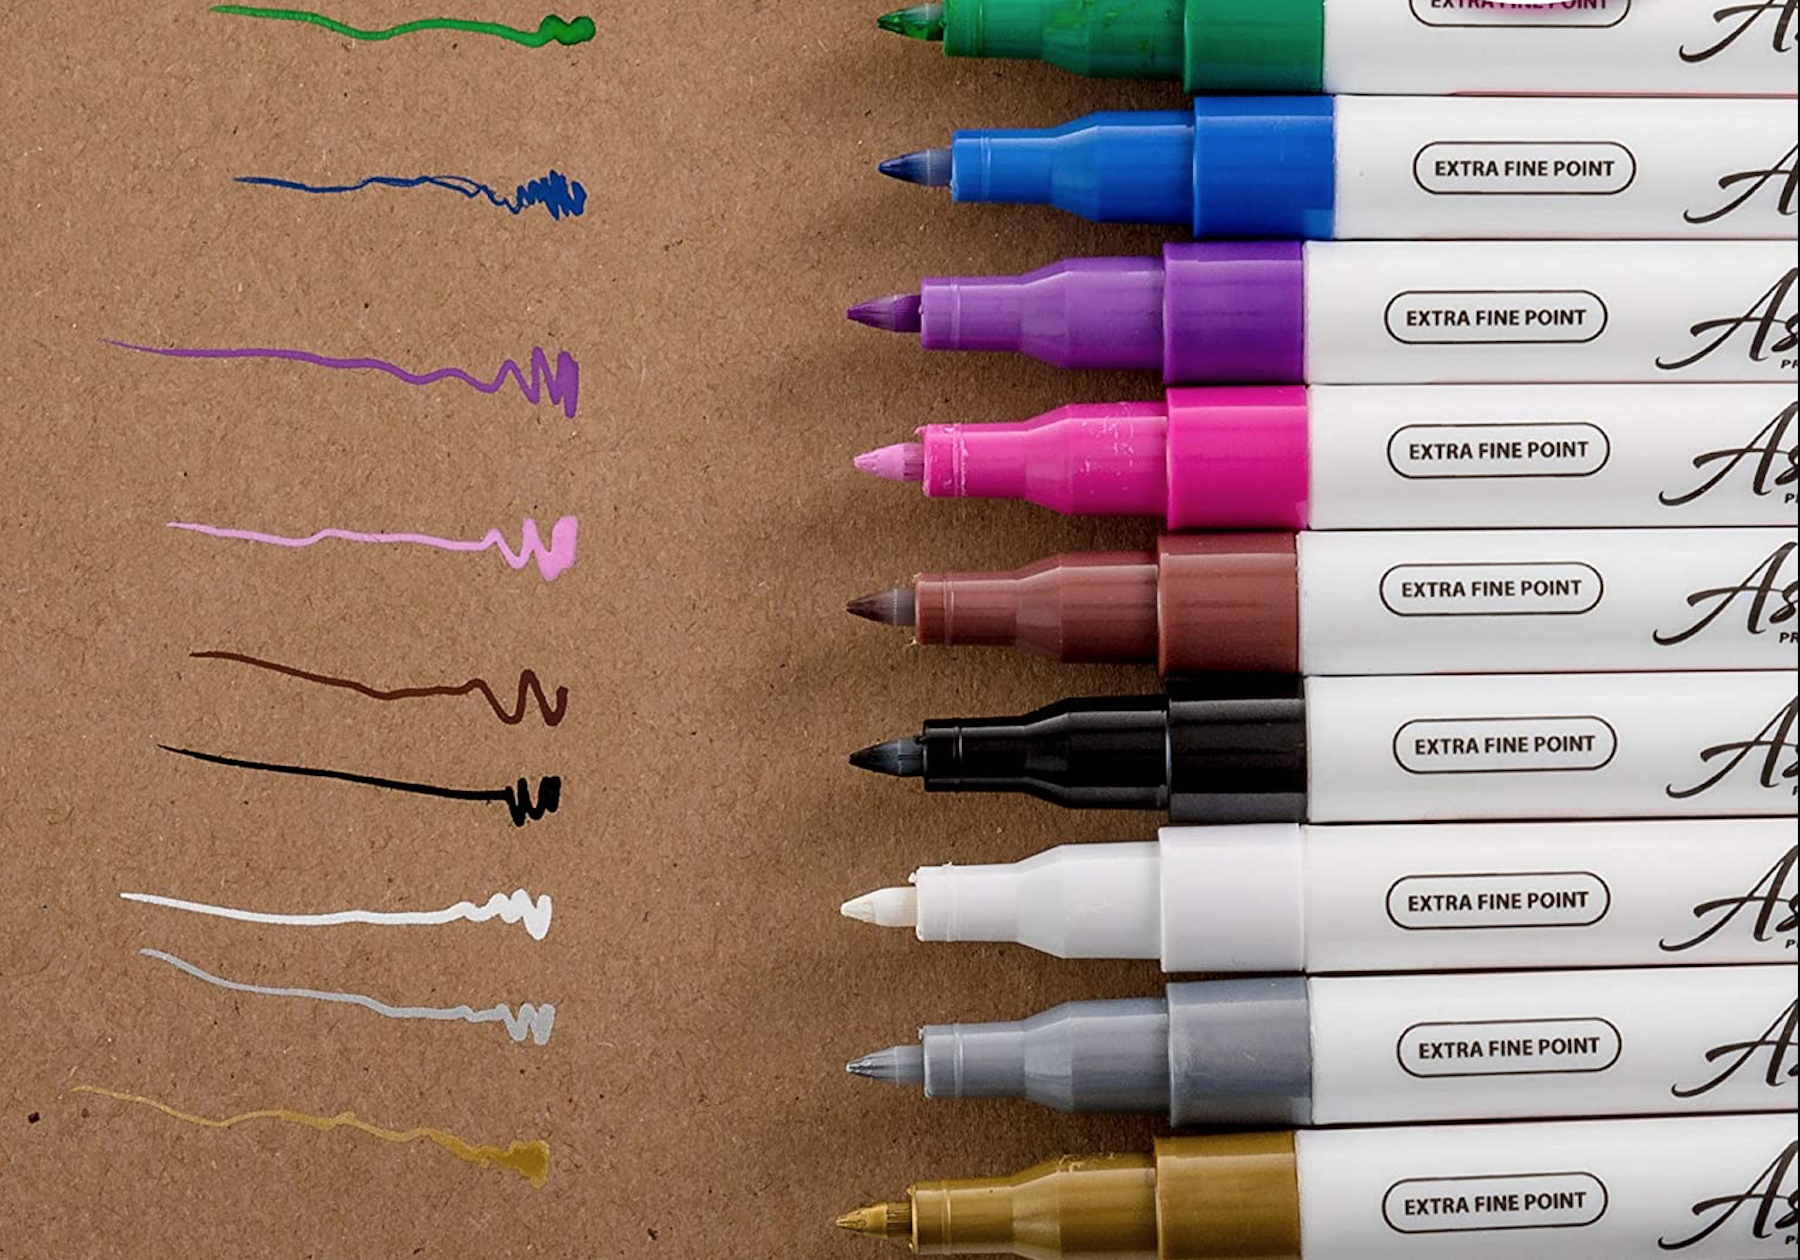 The Best Paint Pens for Wood That Will Brighten Up Your Crafts